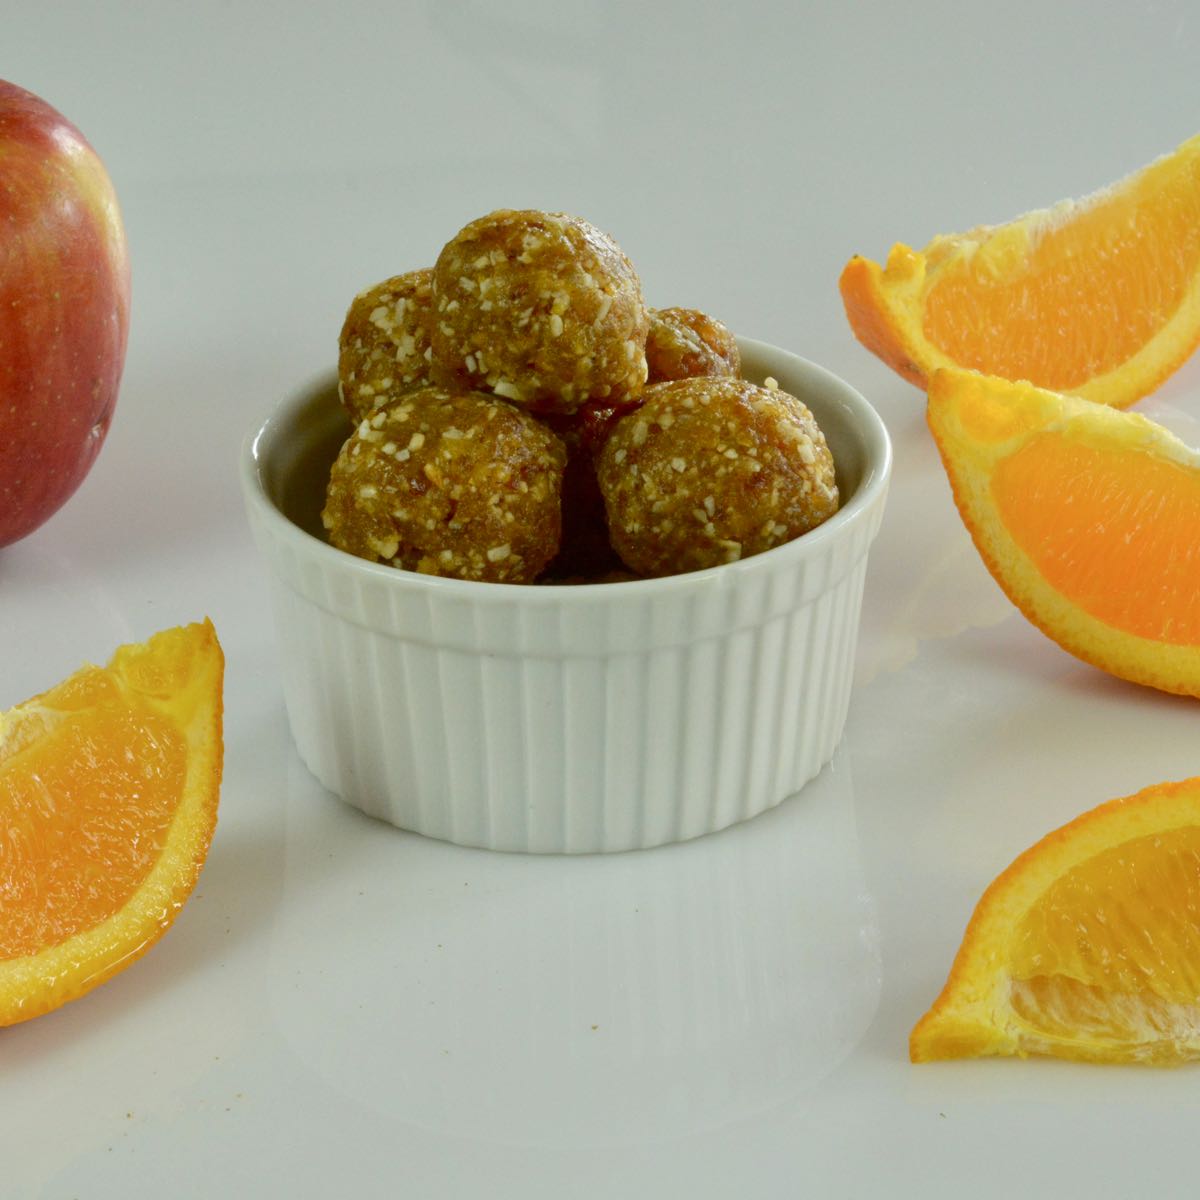 A small dish of Coconut Date Energy Balls surrounded by orange wedges and an apple.